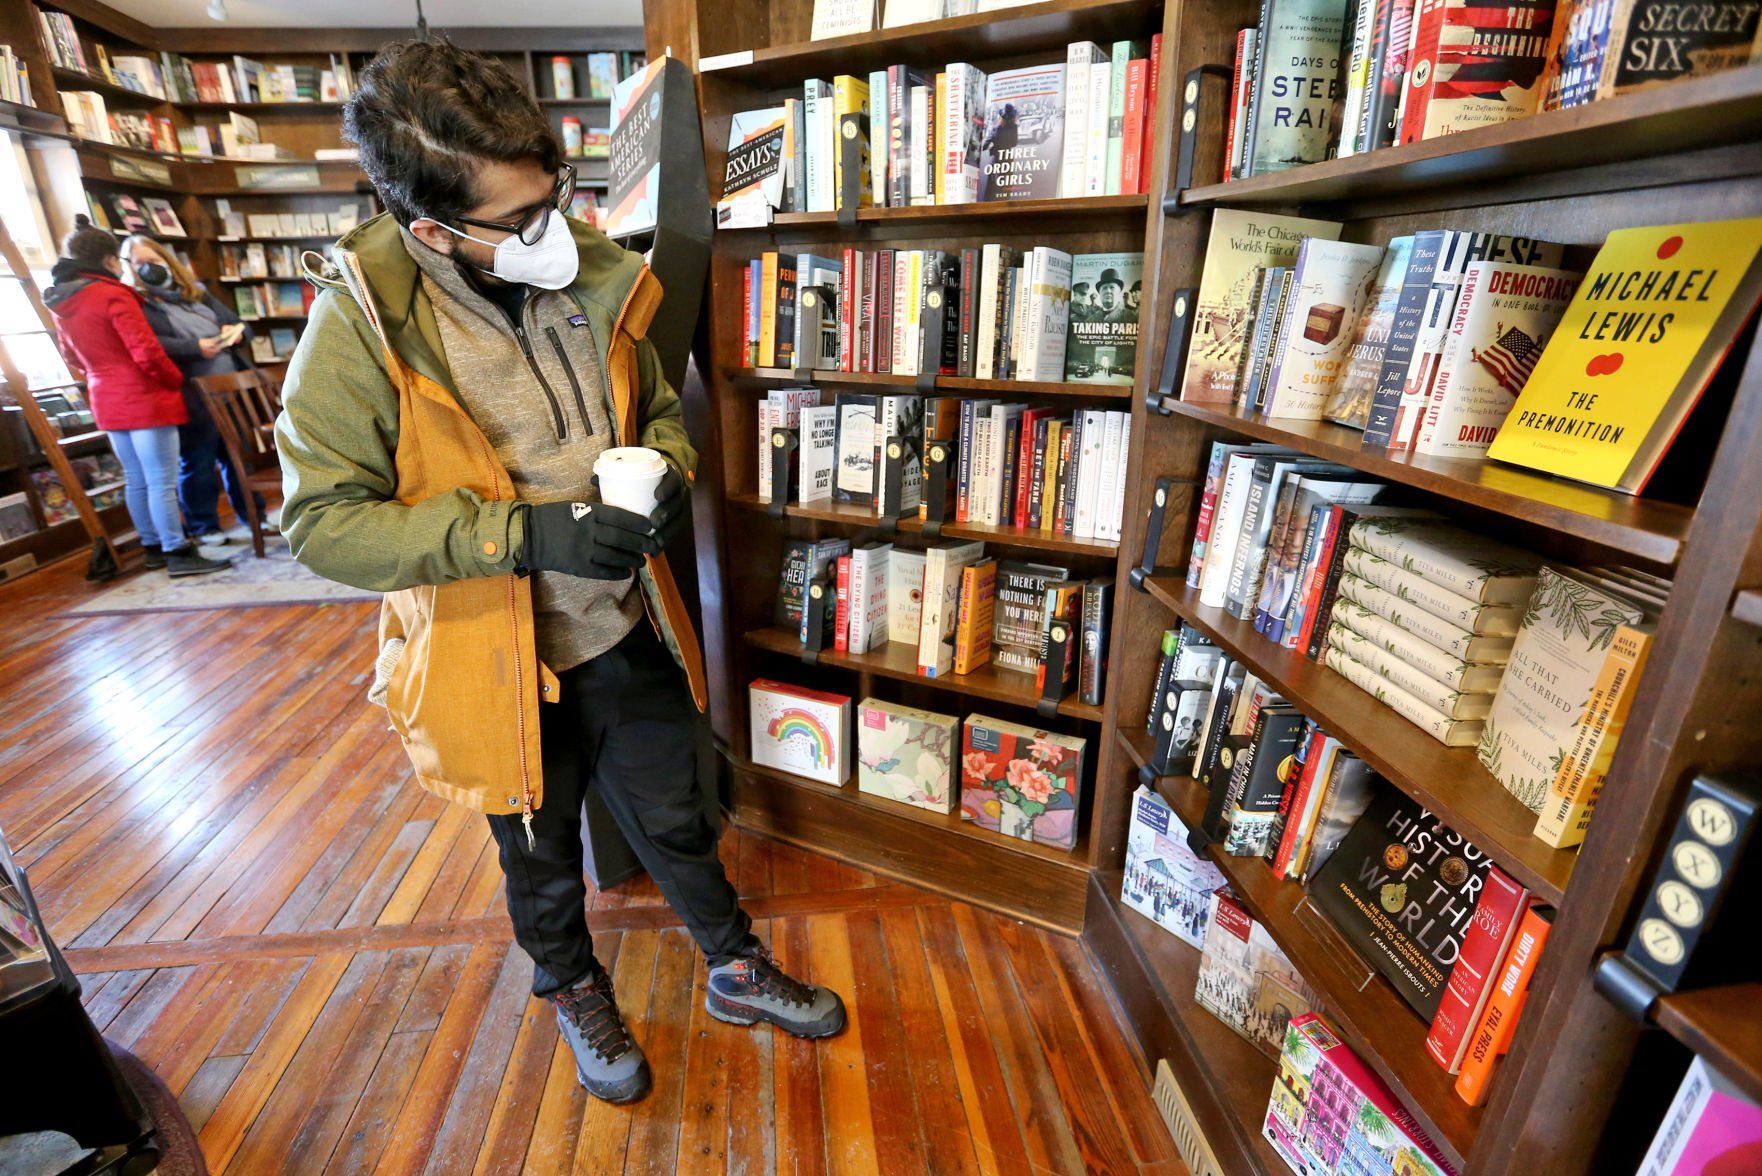 Roger Stans, of Chicago, browses a selection of books at River Lights Bookstore in Dubuque on Wednesday.    PHOTO CREDIT: JESSICA REILLY